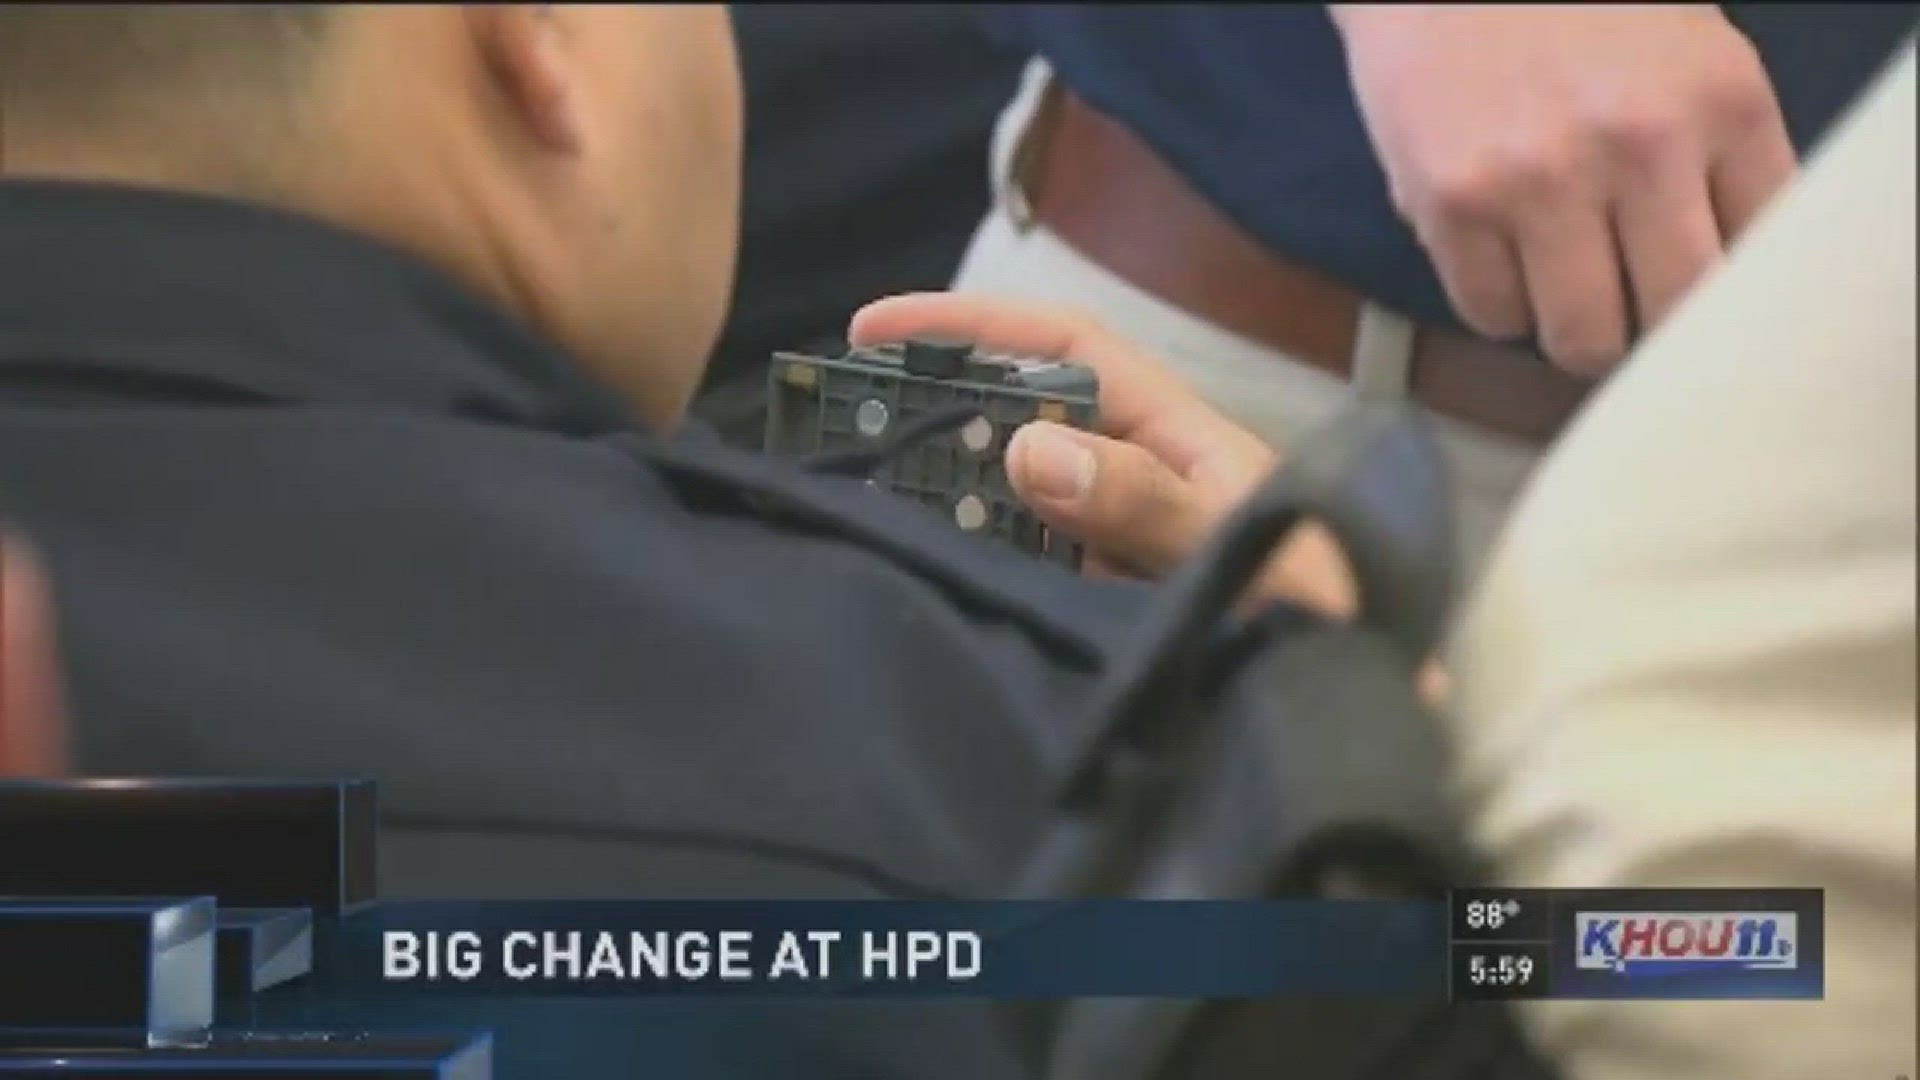 The Houston Police Department is changing its body camera policy to capture more video when officers fail to press the record button, according to an internal HPD order KHOU 11 Investigates obtained.